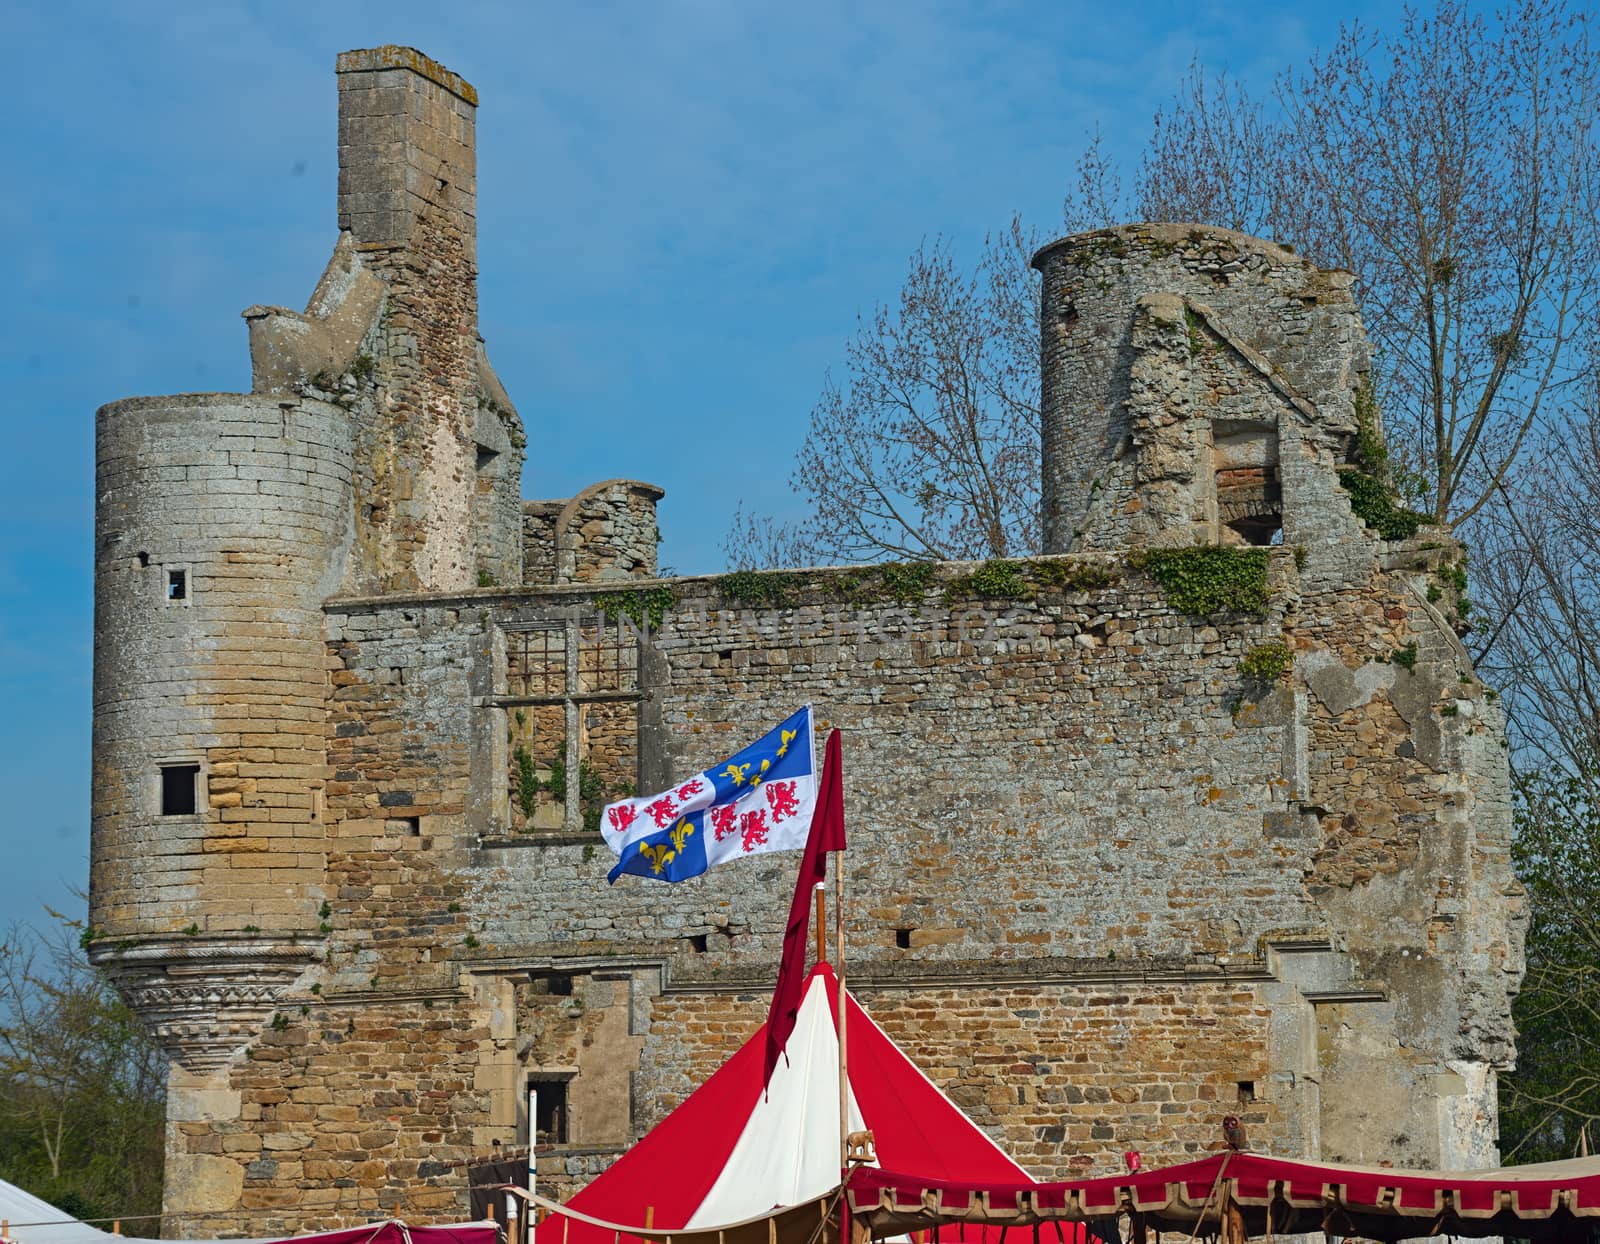 Top of medieval red and white tent with normandy flag at top and castle in background by sheriffkule